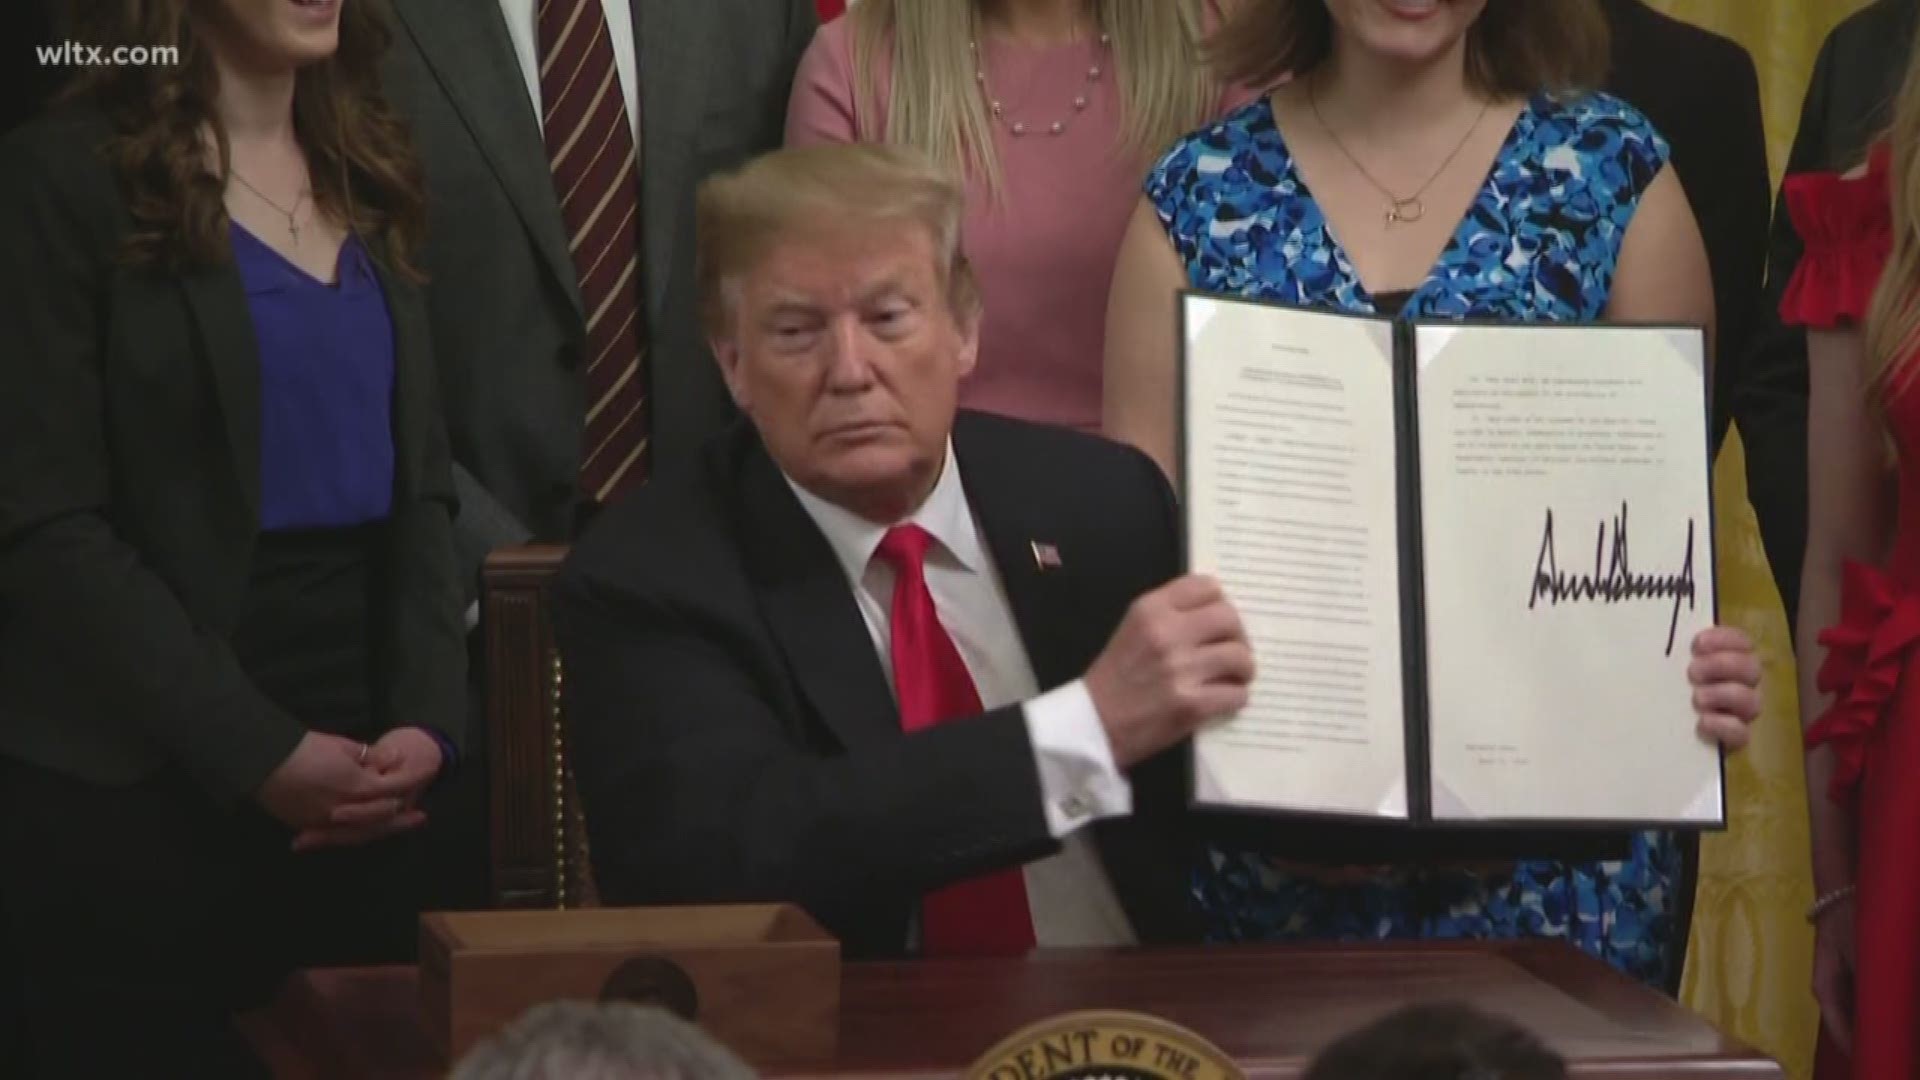 President Donald Trump signed an executive order on Thursday requiring U.S. colleges to certify that they protect free speech on their campuses or risk losing federal research funding.